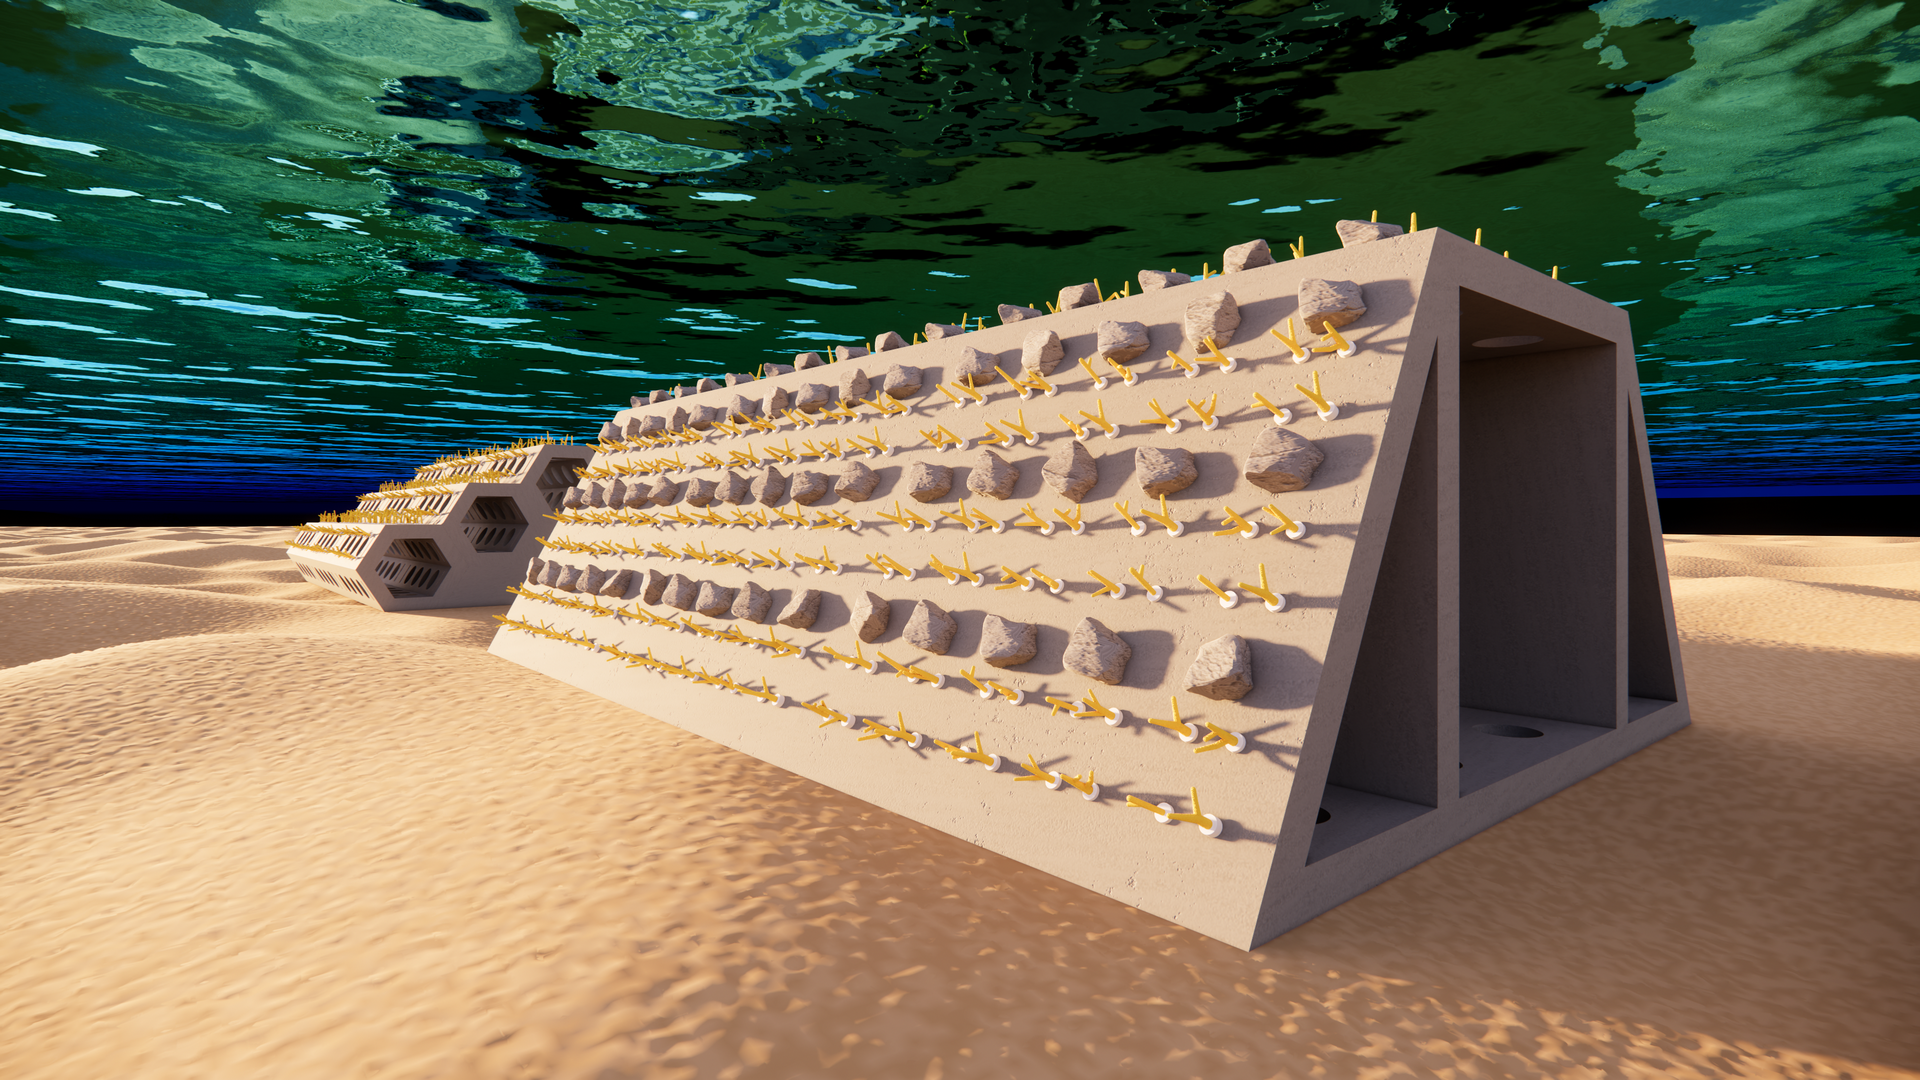 A rendering of manmade coral reef barrier structure.